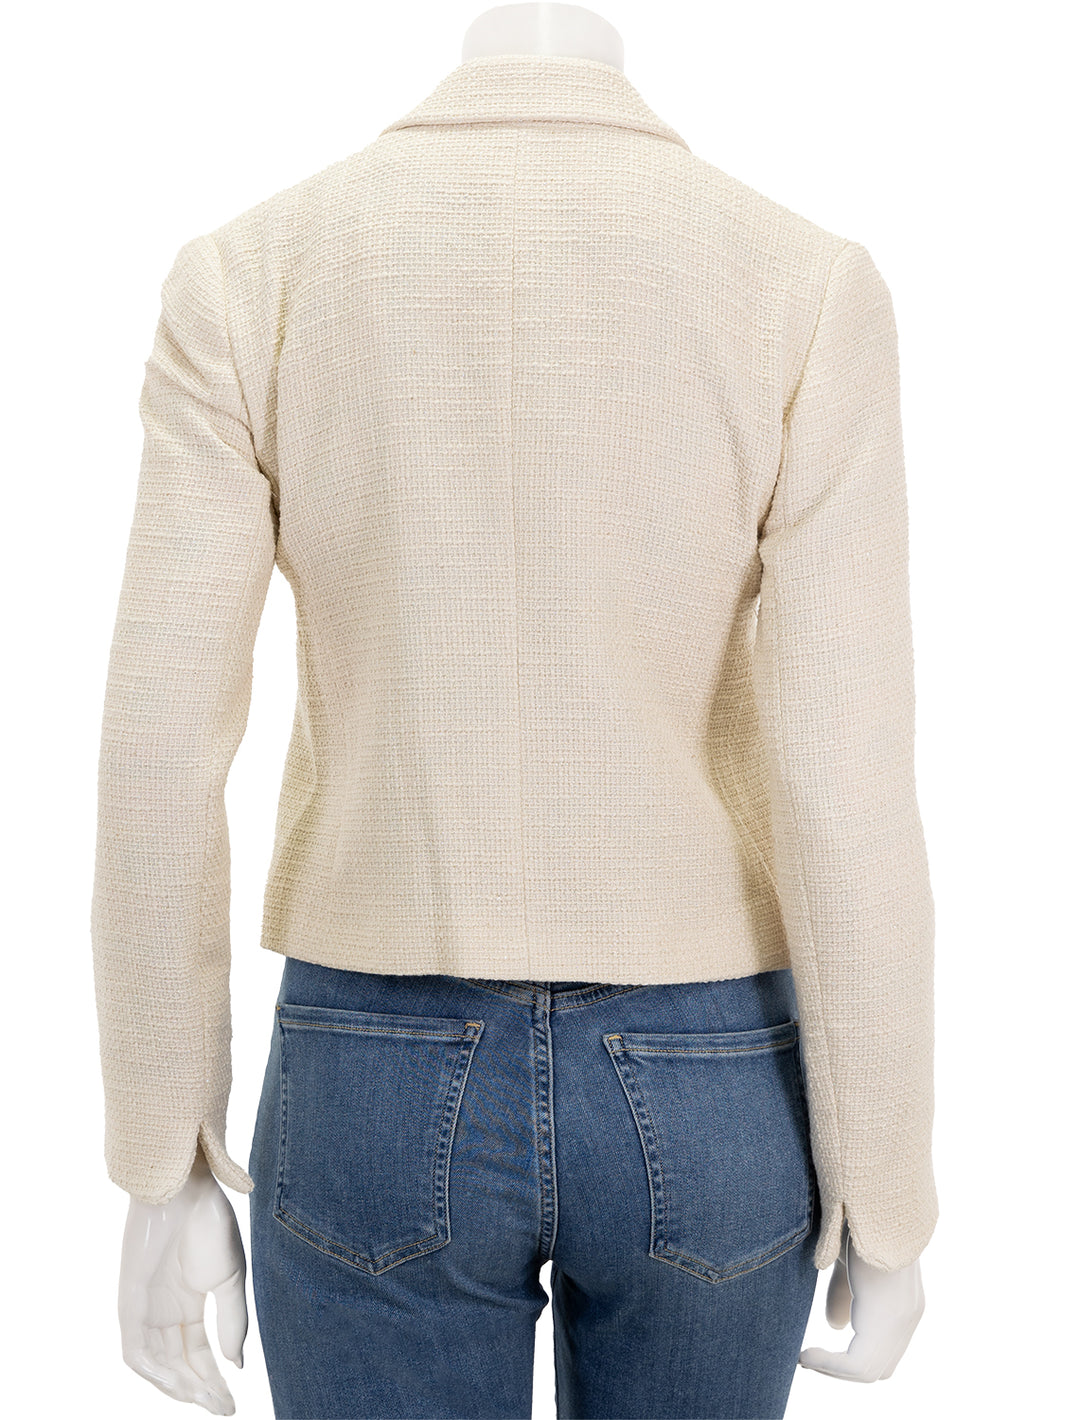 Back view of Vilagallo's imma jacket in ivory.